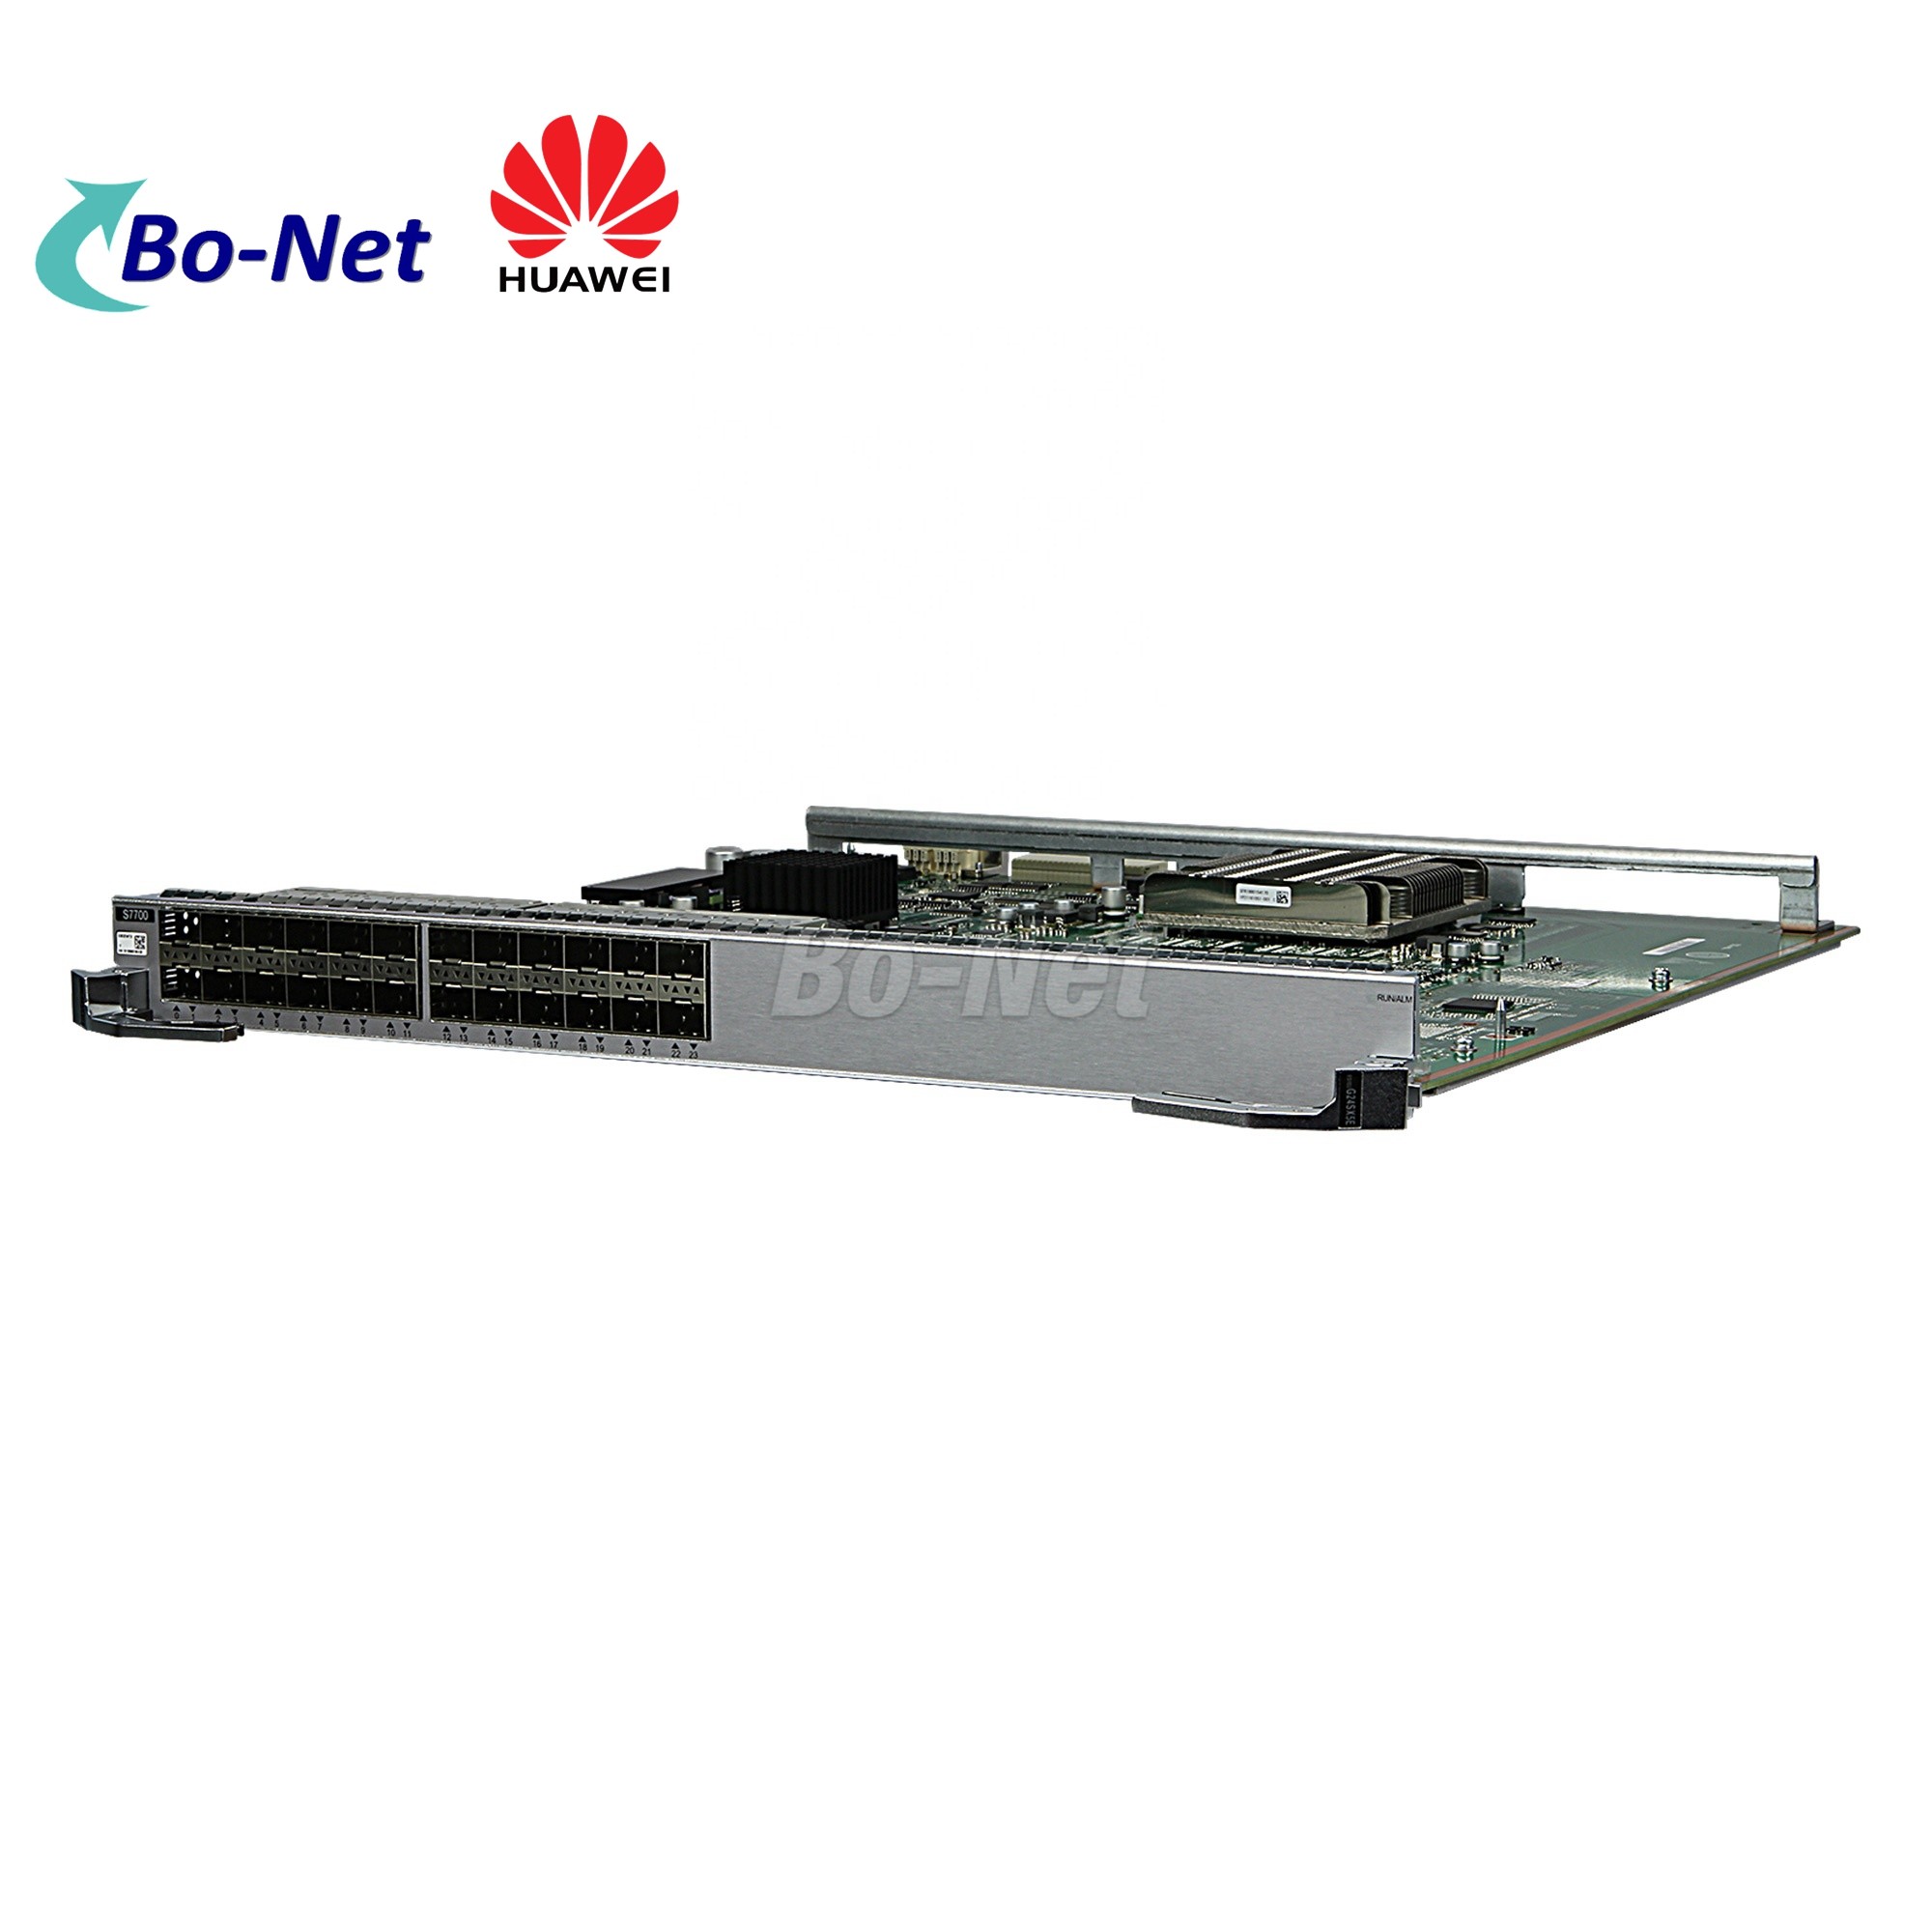 Cheap Huawei  Brand New Wireless Networking Equipment 24-port 100/1000BASE-X Interface Card ES1D2G24SX5E for sale